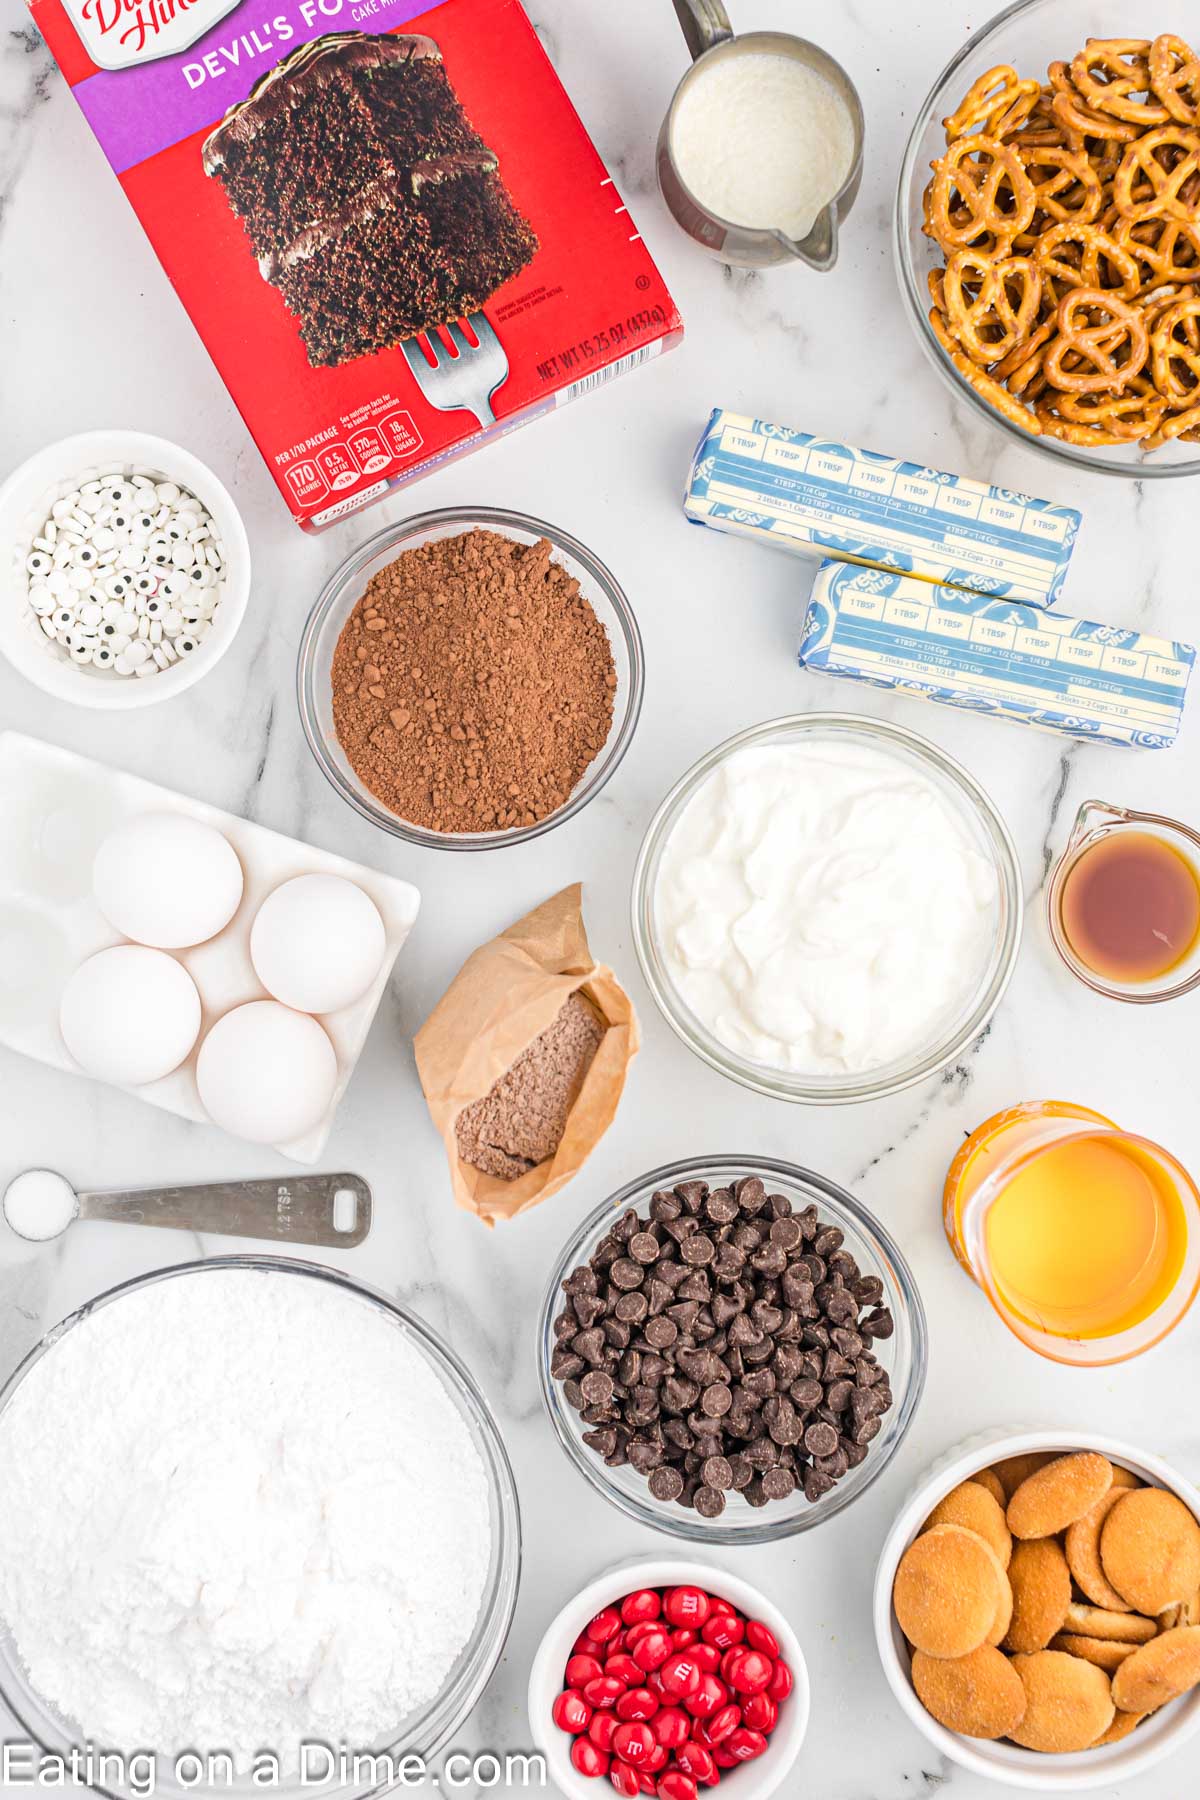 Ingredients needed - Devil's Food Cake Mix, chocolate pudding, chocolate chips, eggs, oil, water, sour cream, butter, powdered sugar, cocoa powder, heavy cream, vanilla extract, salt, pretzel twists, nilla wafers, red M&M, candy eyeballs